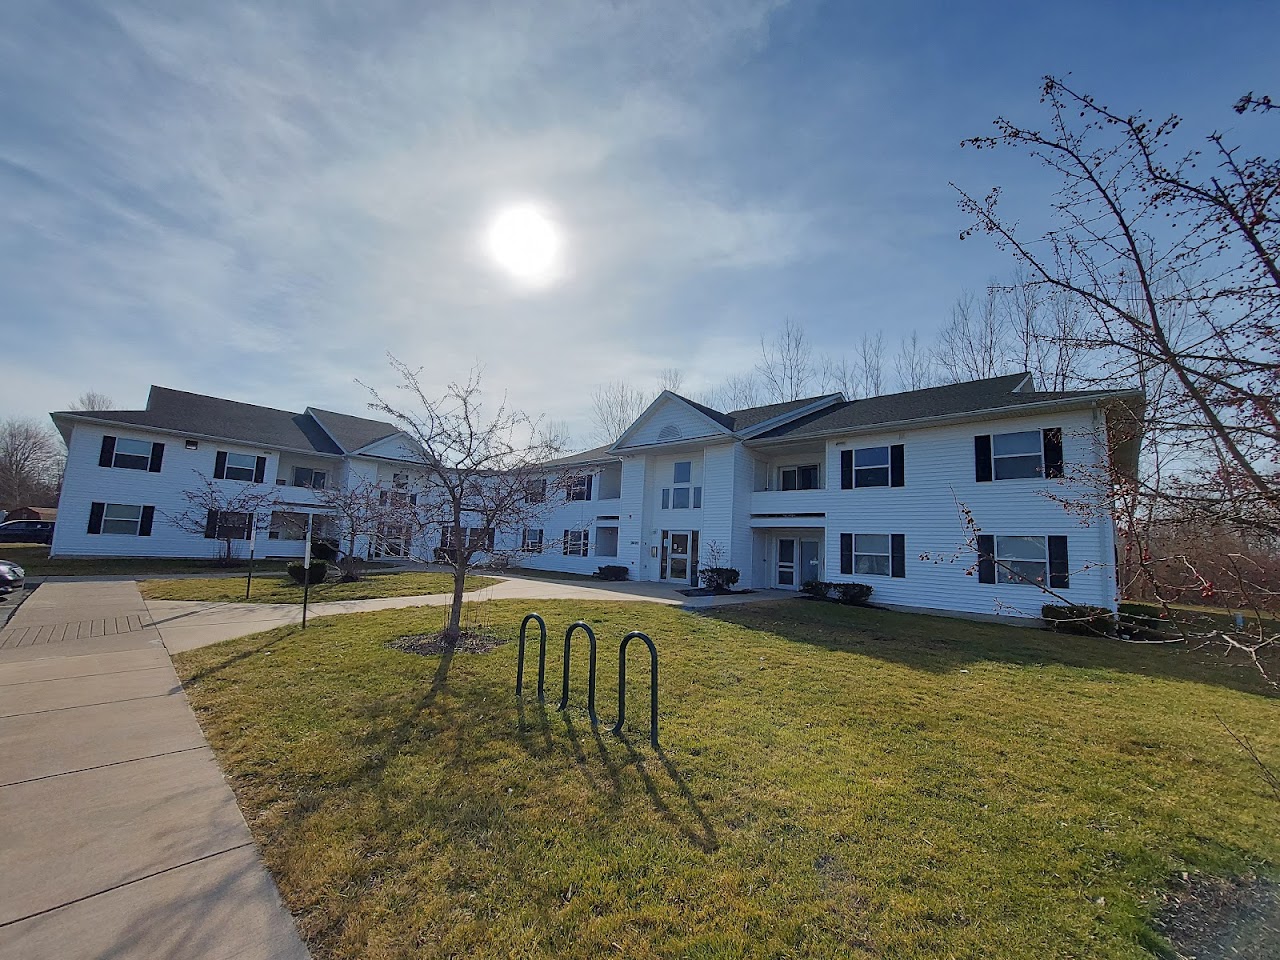 Photo of WILSON VILLA. Affordable housing located at 240 AUTUMNVIEW DR WILSON, NY 14172